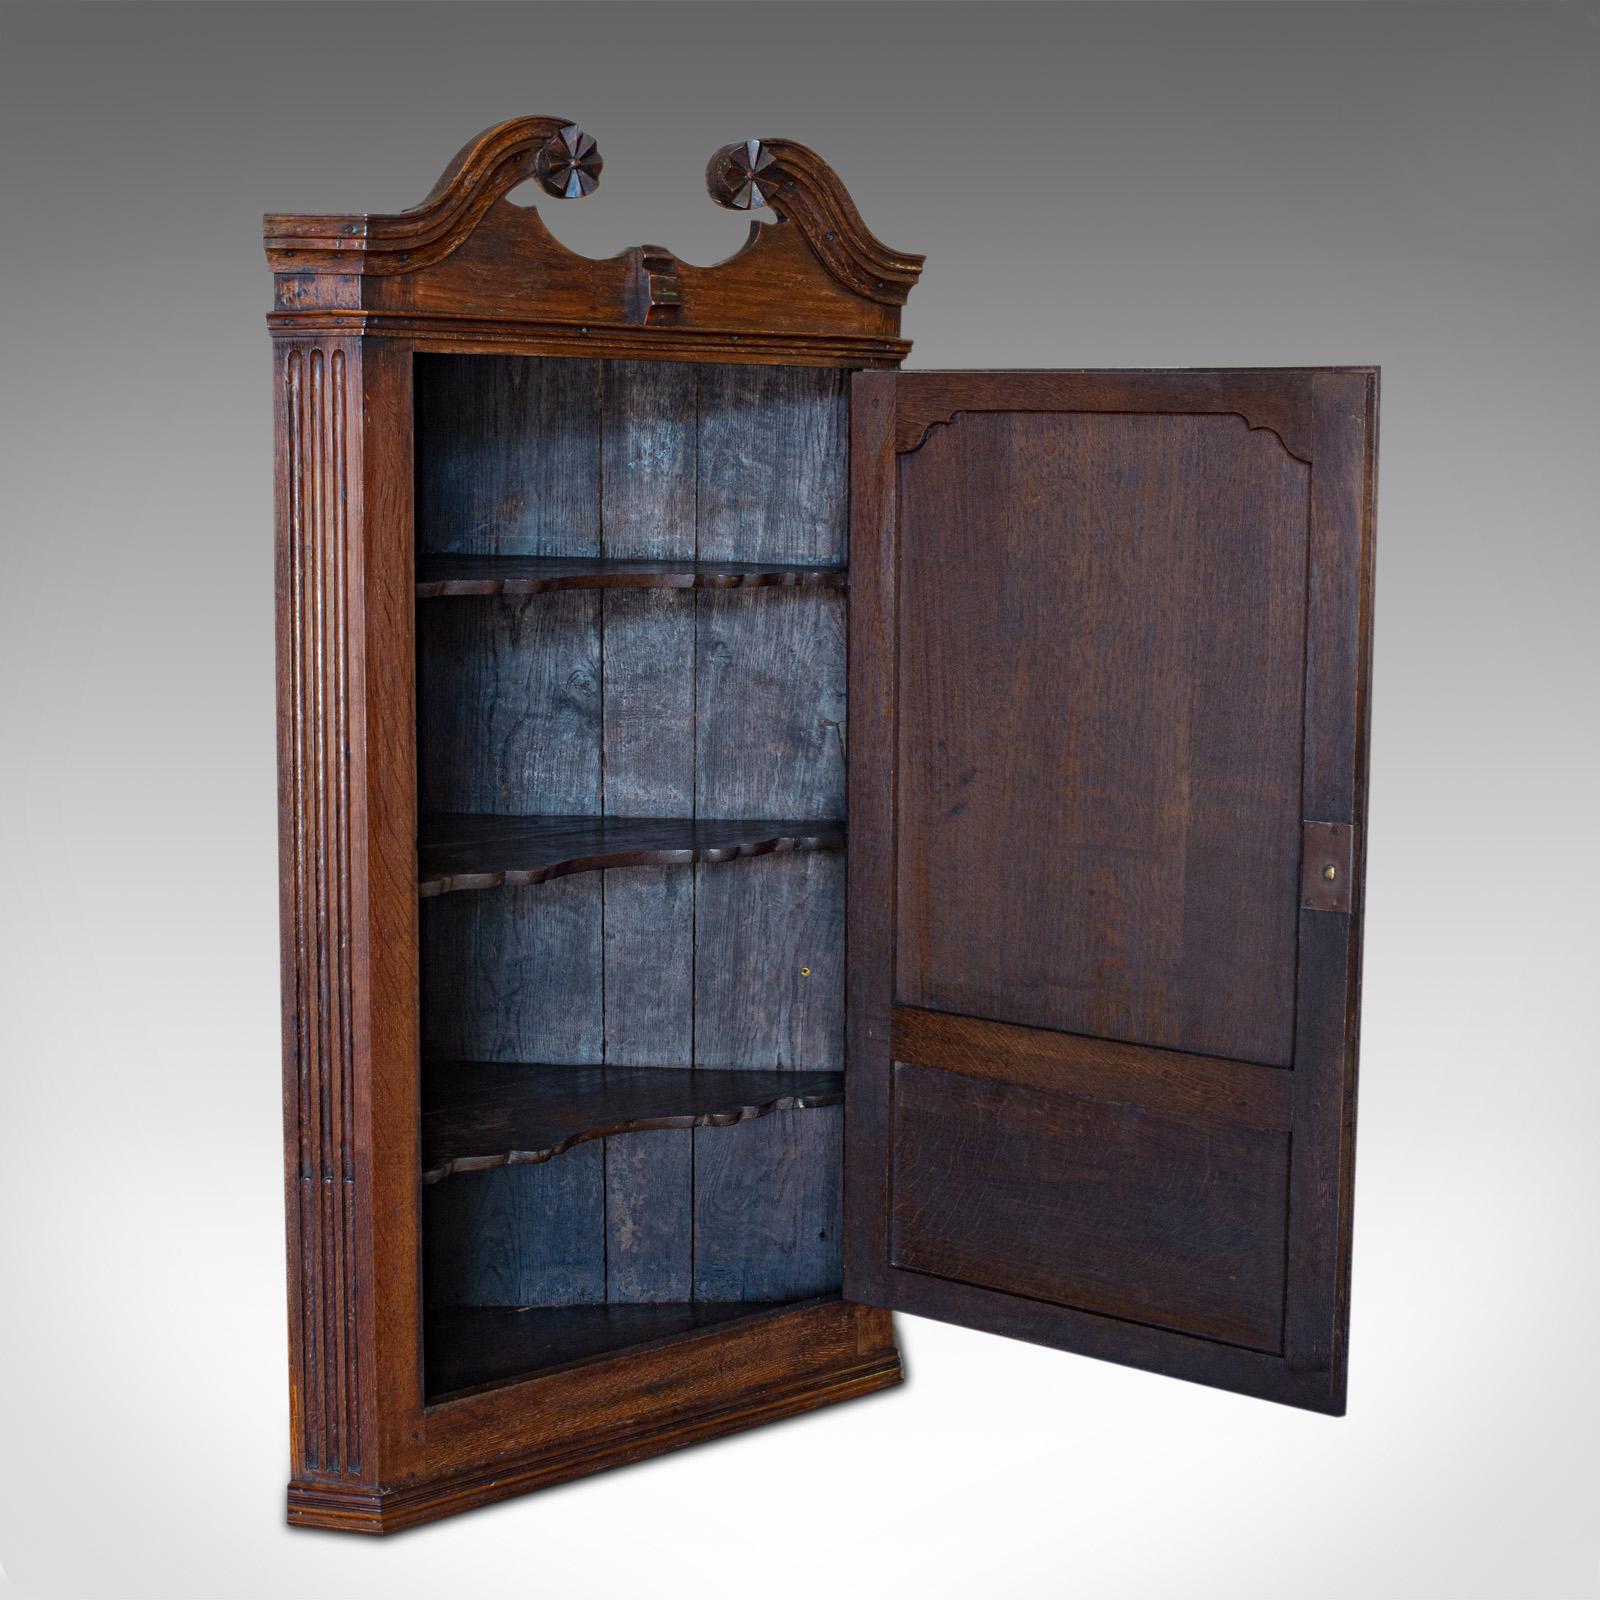 This is an antique Georgian corner cabinet. An English, oak wall hanging cupboard, dating to the late 18th century, circa 1780.

Pleasingly crafted Georgian cabinet
Displays a desirable aged patina
Oak displays fine grain interest and wisps of